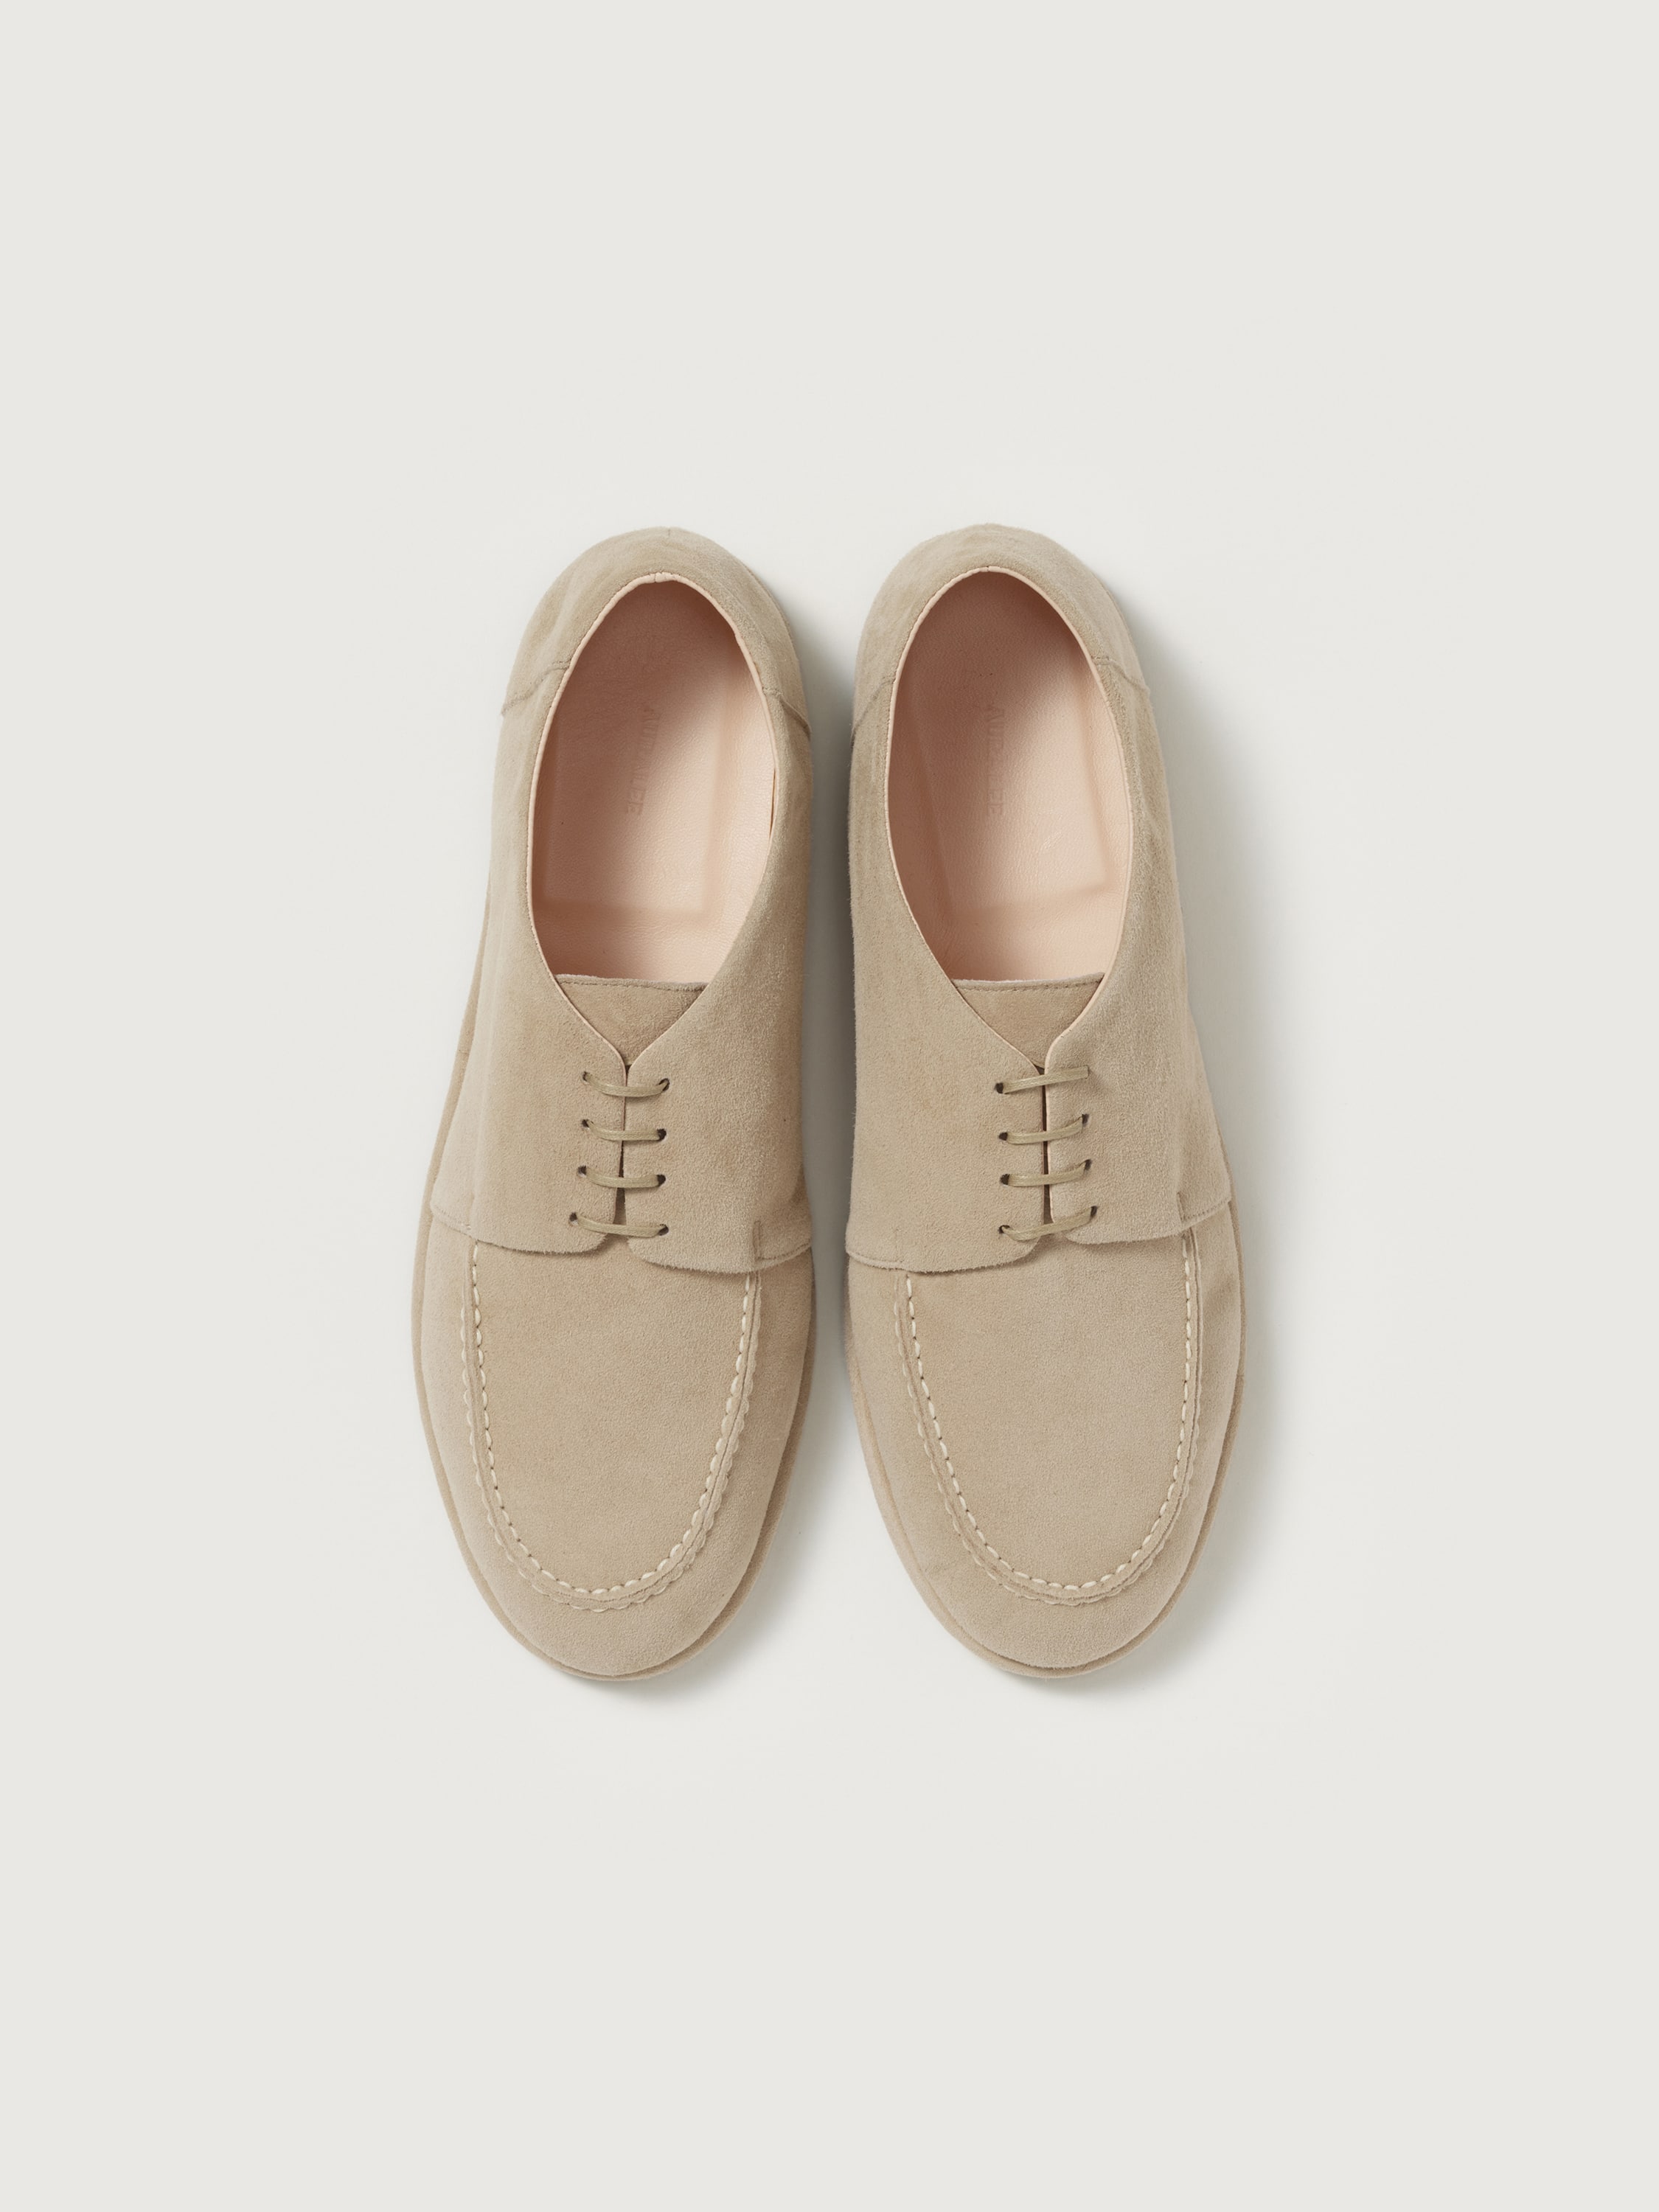 LEATHER SHOES 詳細画像 BEIGE 2